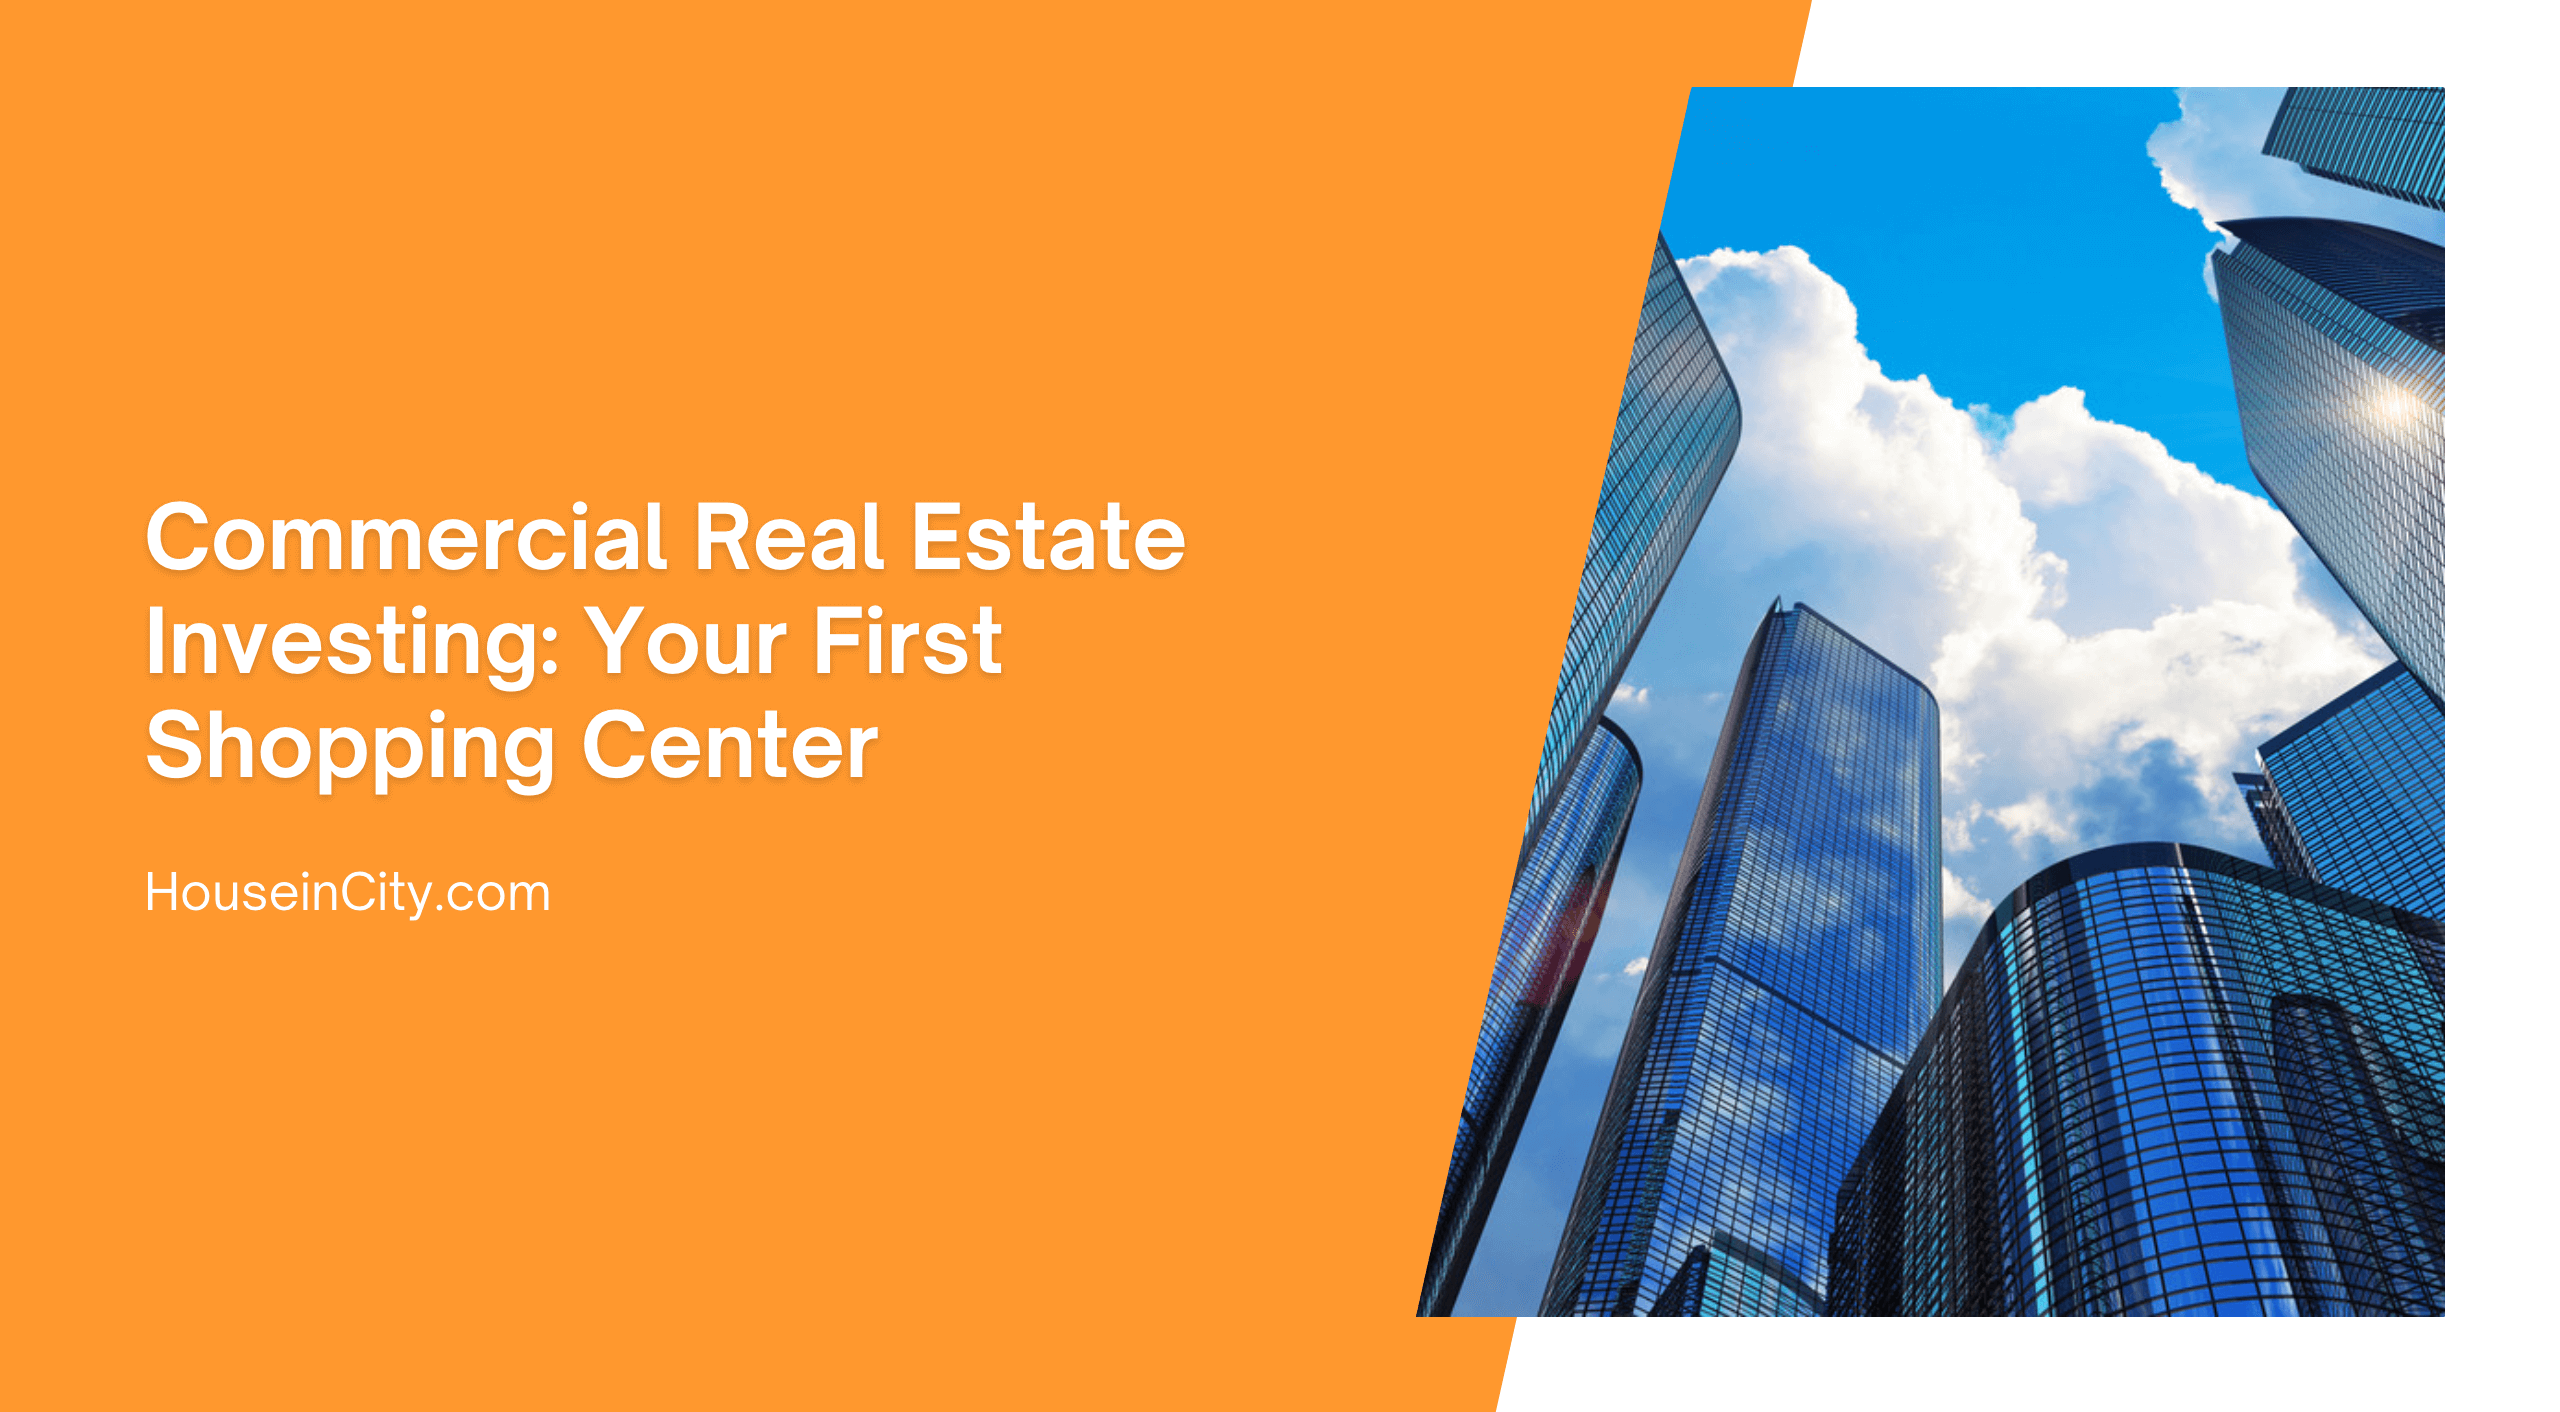 Commercial Real Estate Investing: Your First Shopping Center